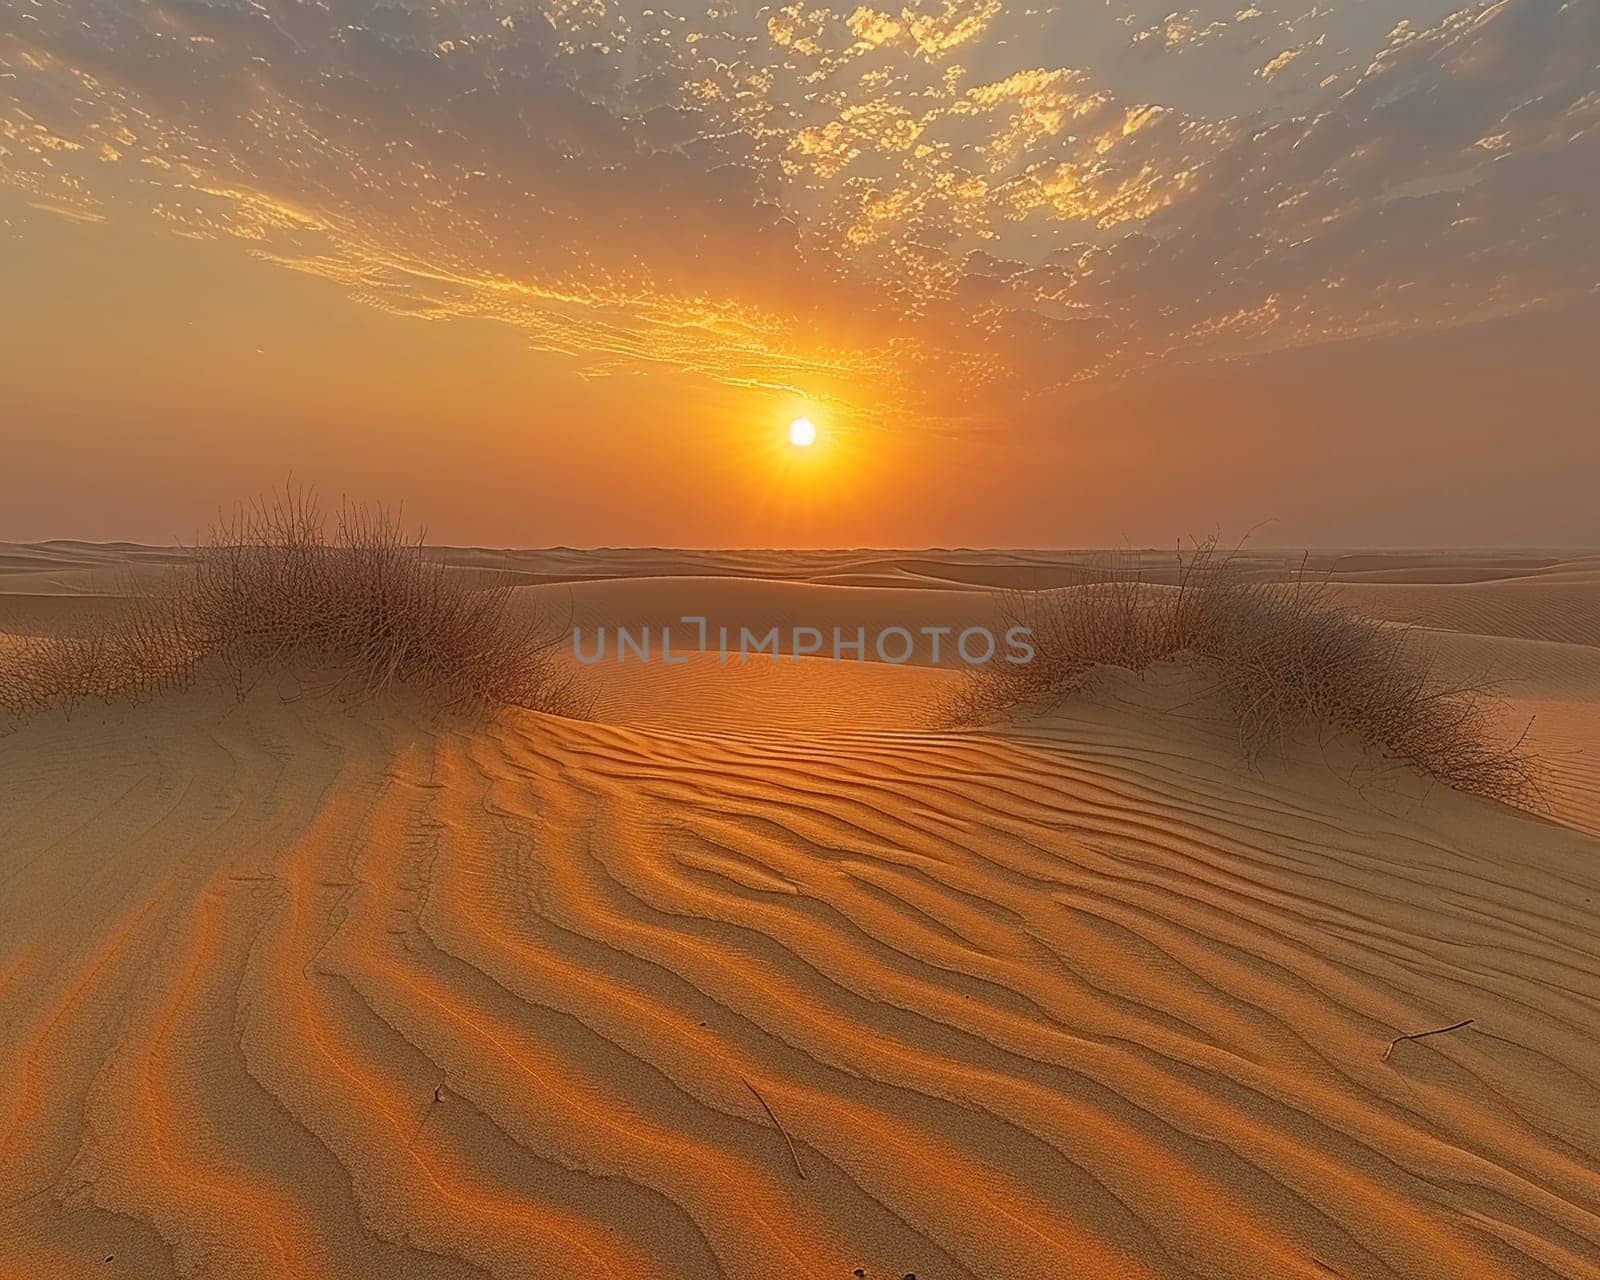 Patterns in the sand dunes under a setting sun, representing natural artistry.